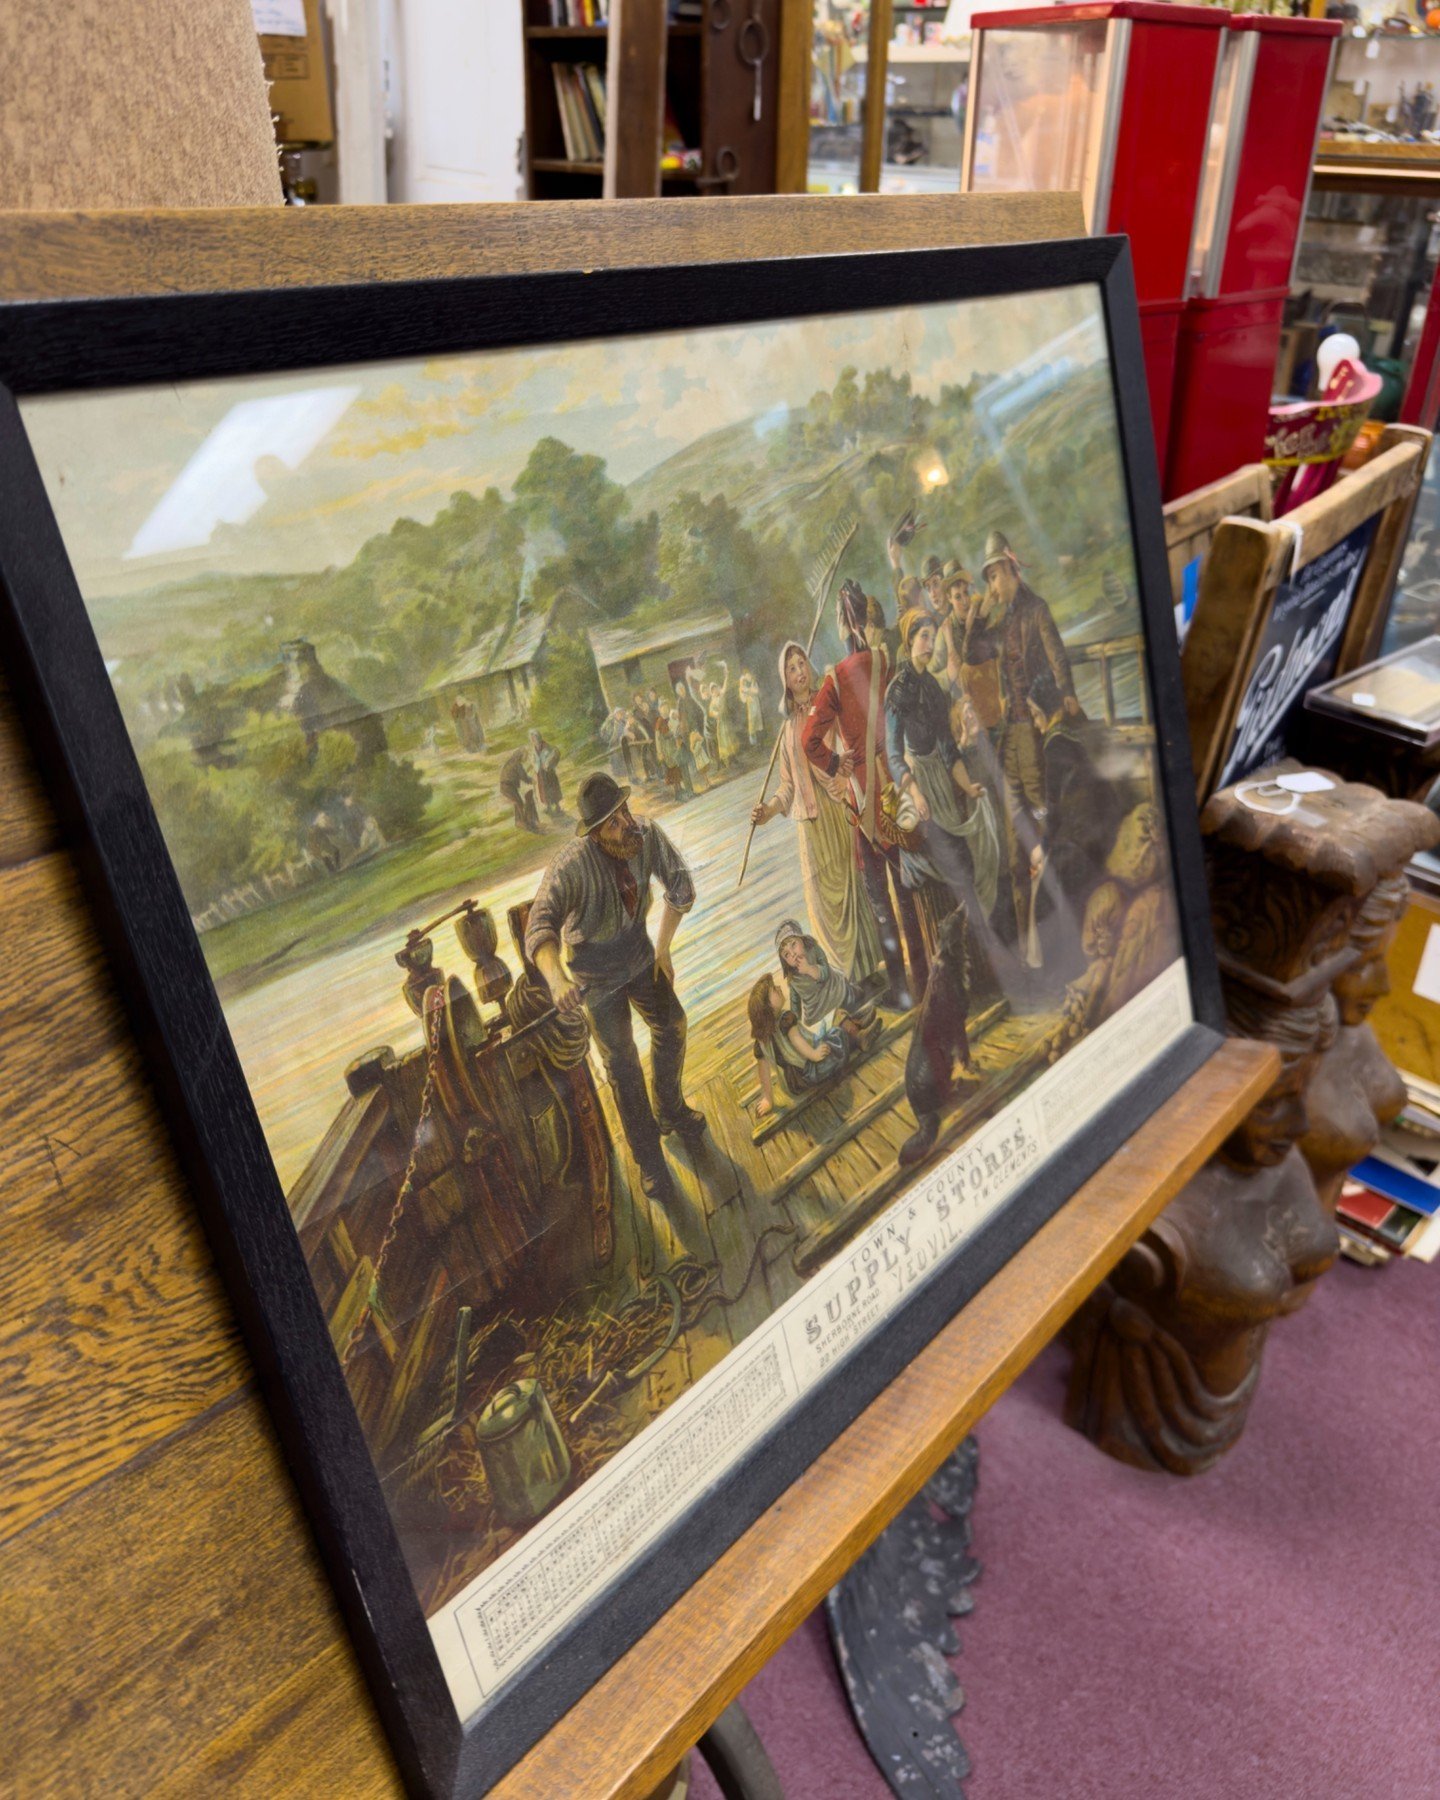 We have over 100 #antique dealers at #PasadenaAntiqueCenter &amp; Annex! That means lots of different types of antique and #vintage art across many mediums. 🖼️⠀
⠀
Come by every day between 10am-6pm to check out what&rsquo;s new! #FoundItAtPAC #Antiq